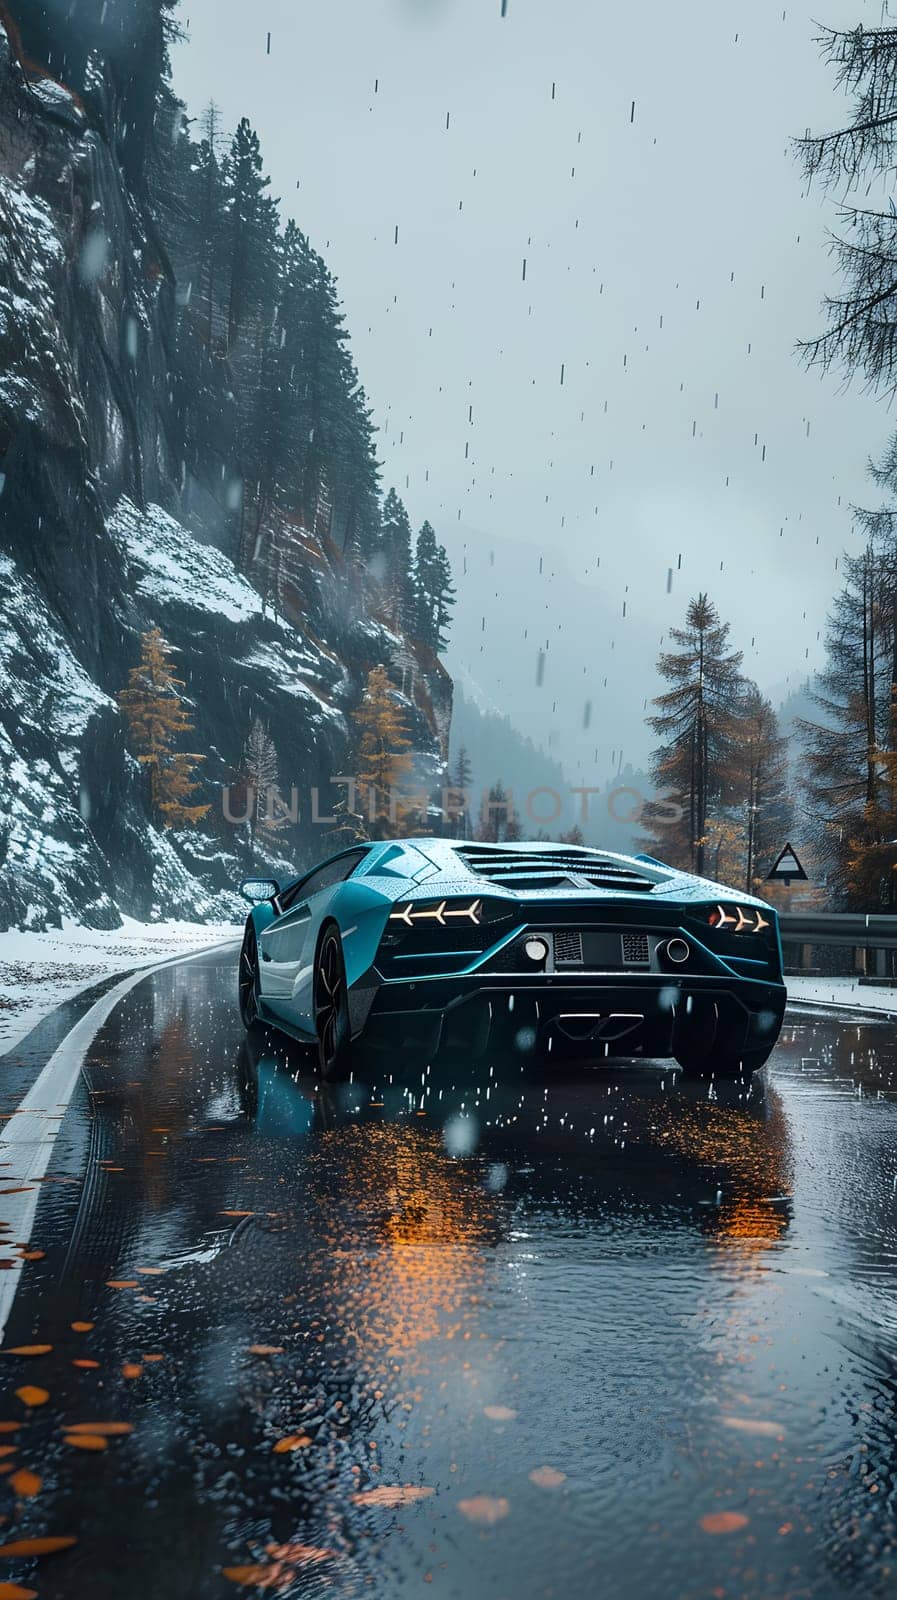 An azure Lamborghini Aventador cruises through a snowy mountain landscape, with the asphalt road glistening under the vehicles automotive lighting against a backdrop of the sky and water